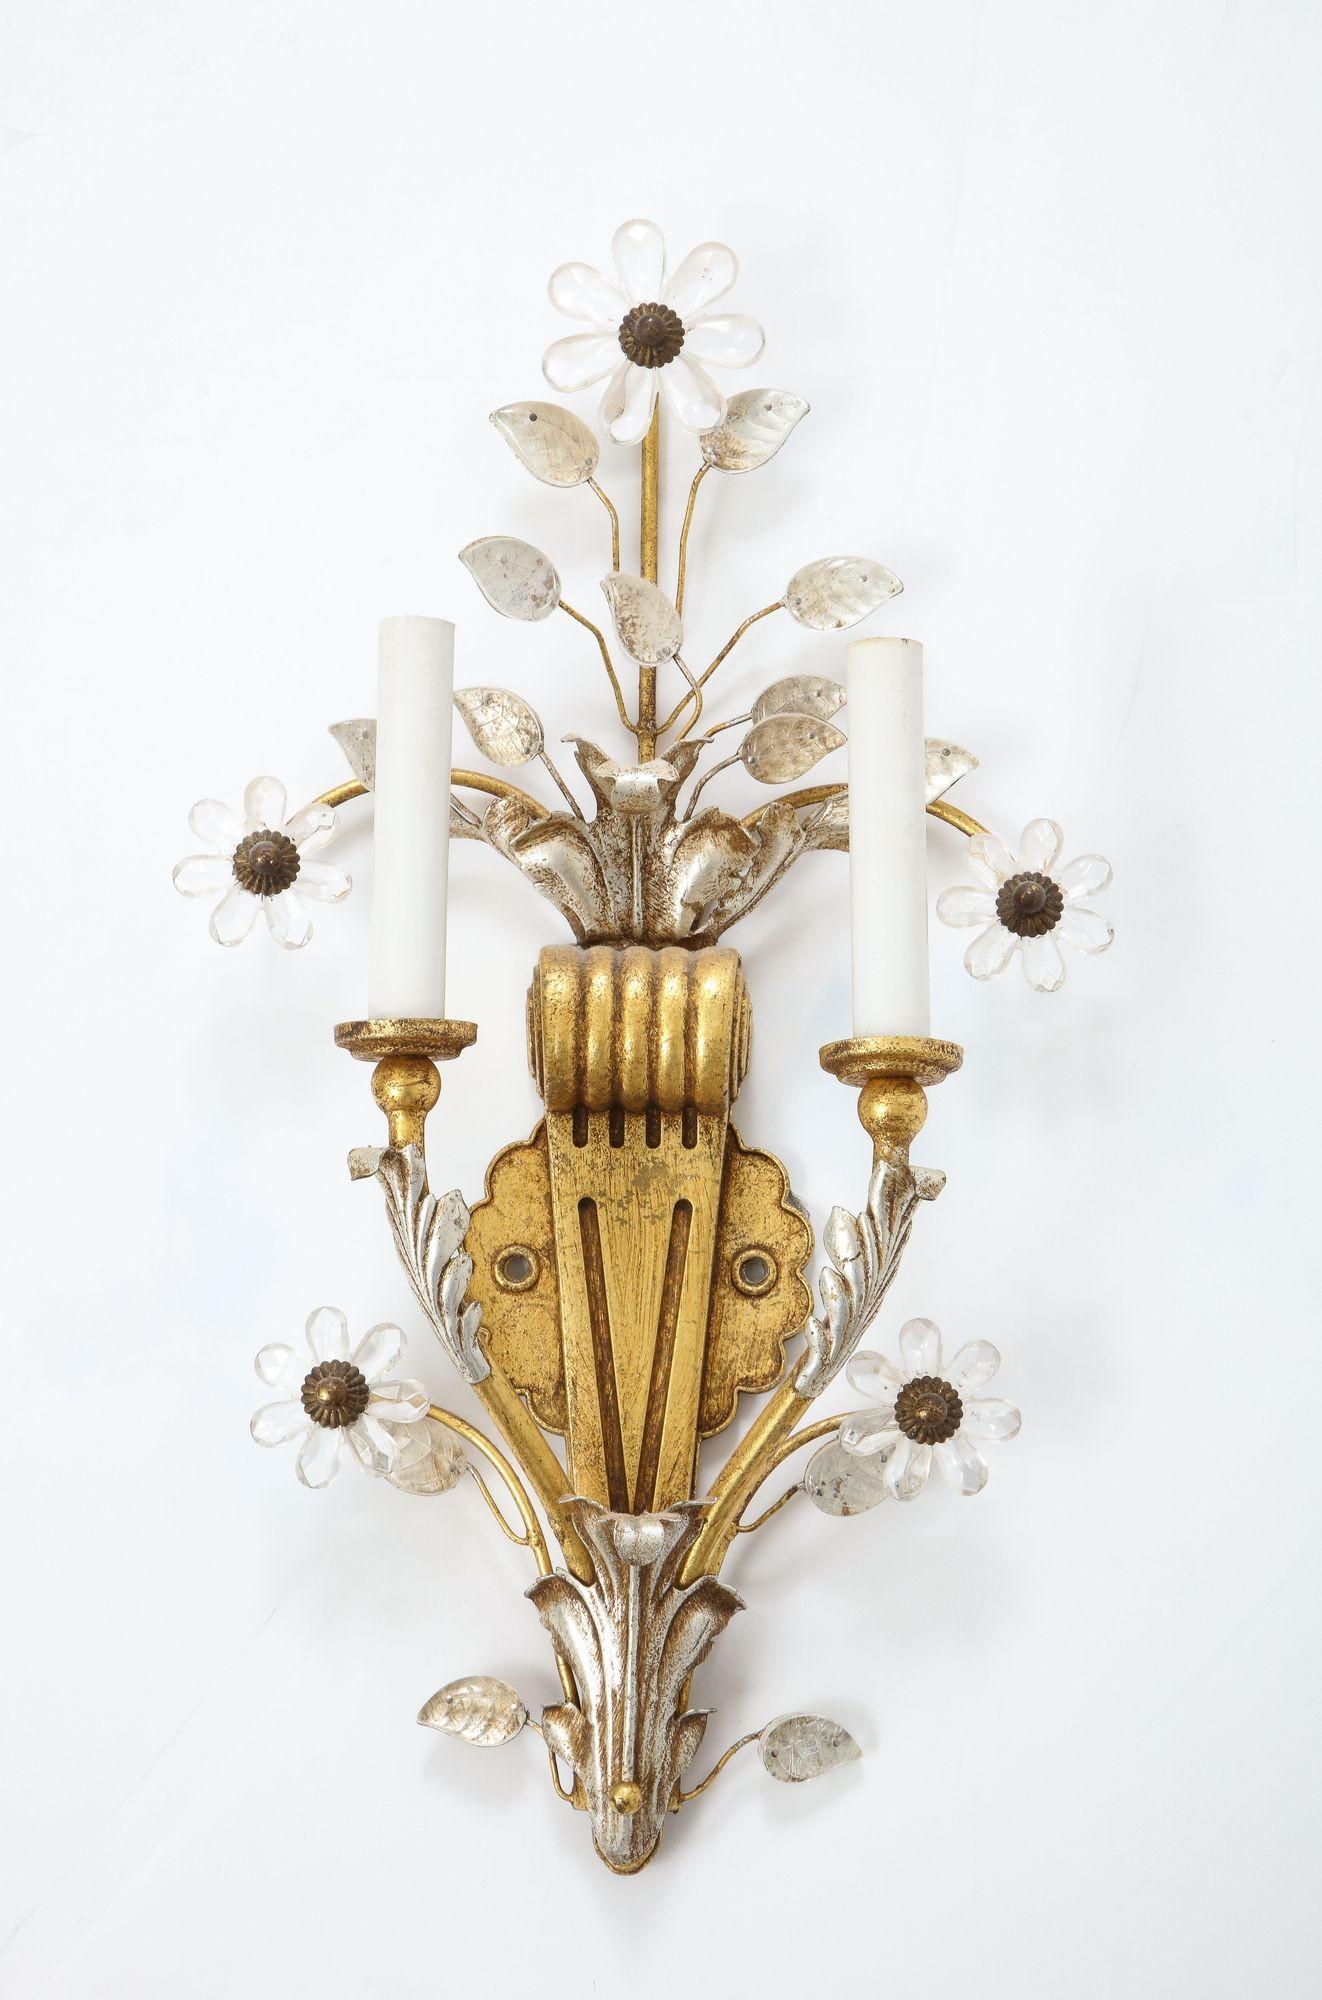 Mid-20th Century Pair of Gilt and Silvered Rock Crystal Floral Motif Sconces By Banci For Sale